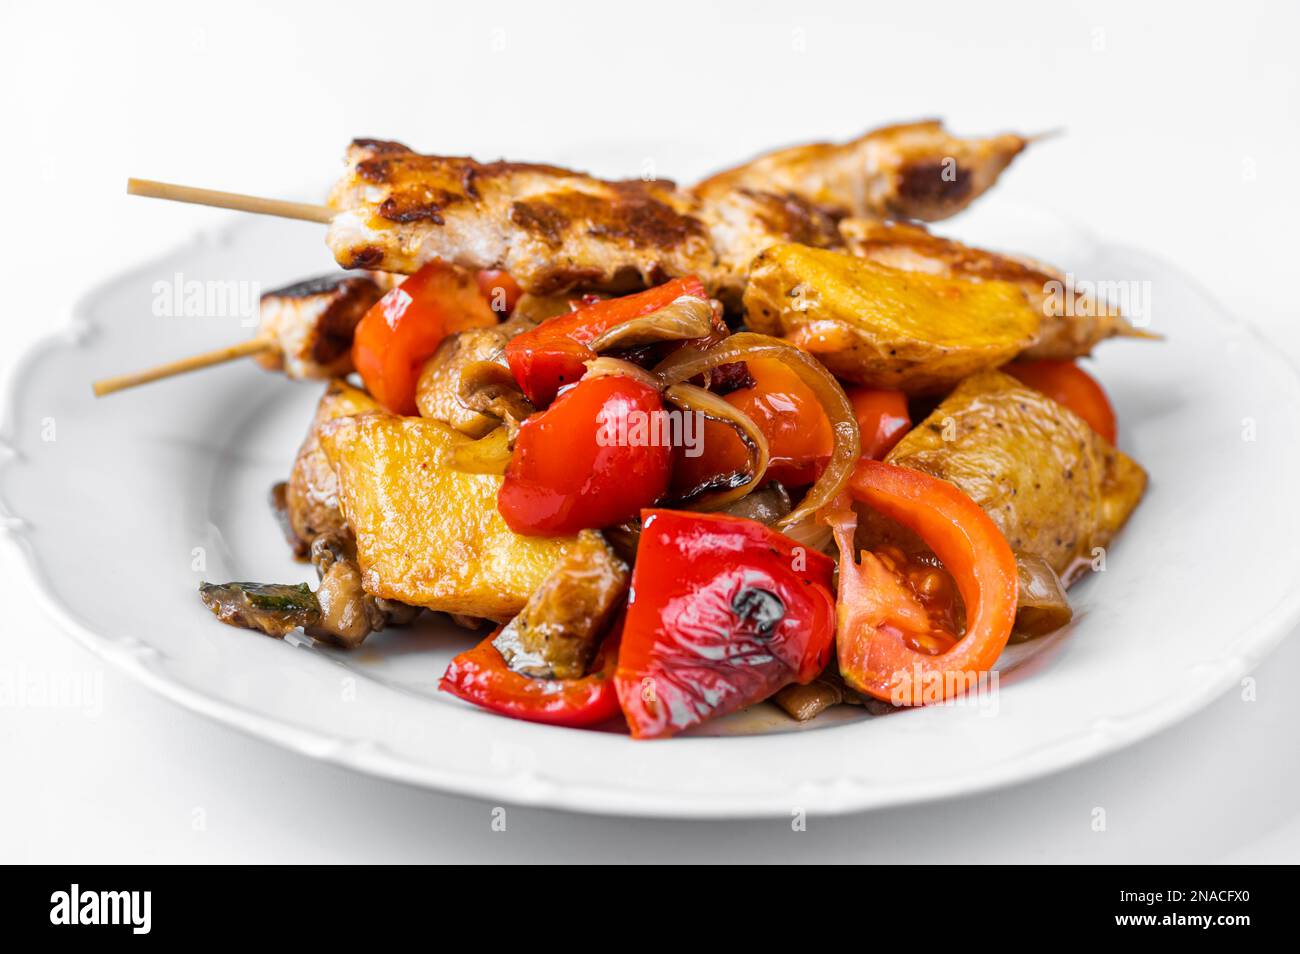 Souvlaki, pork meat on skewer on baked juicy vegetable on white plate on white background. Delicious greek lunch or dinner, closeup. Stock Photo